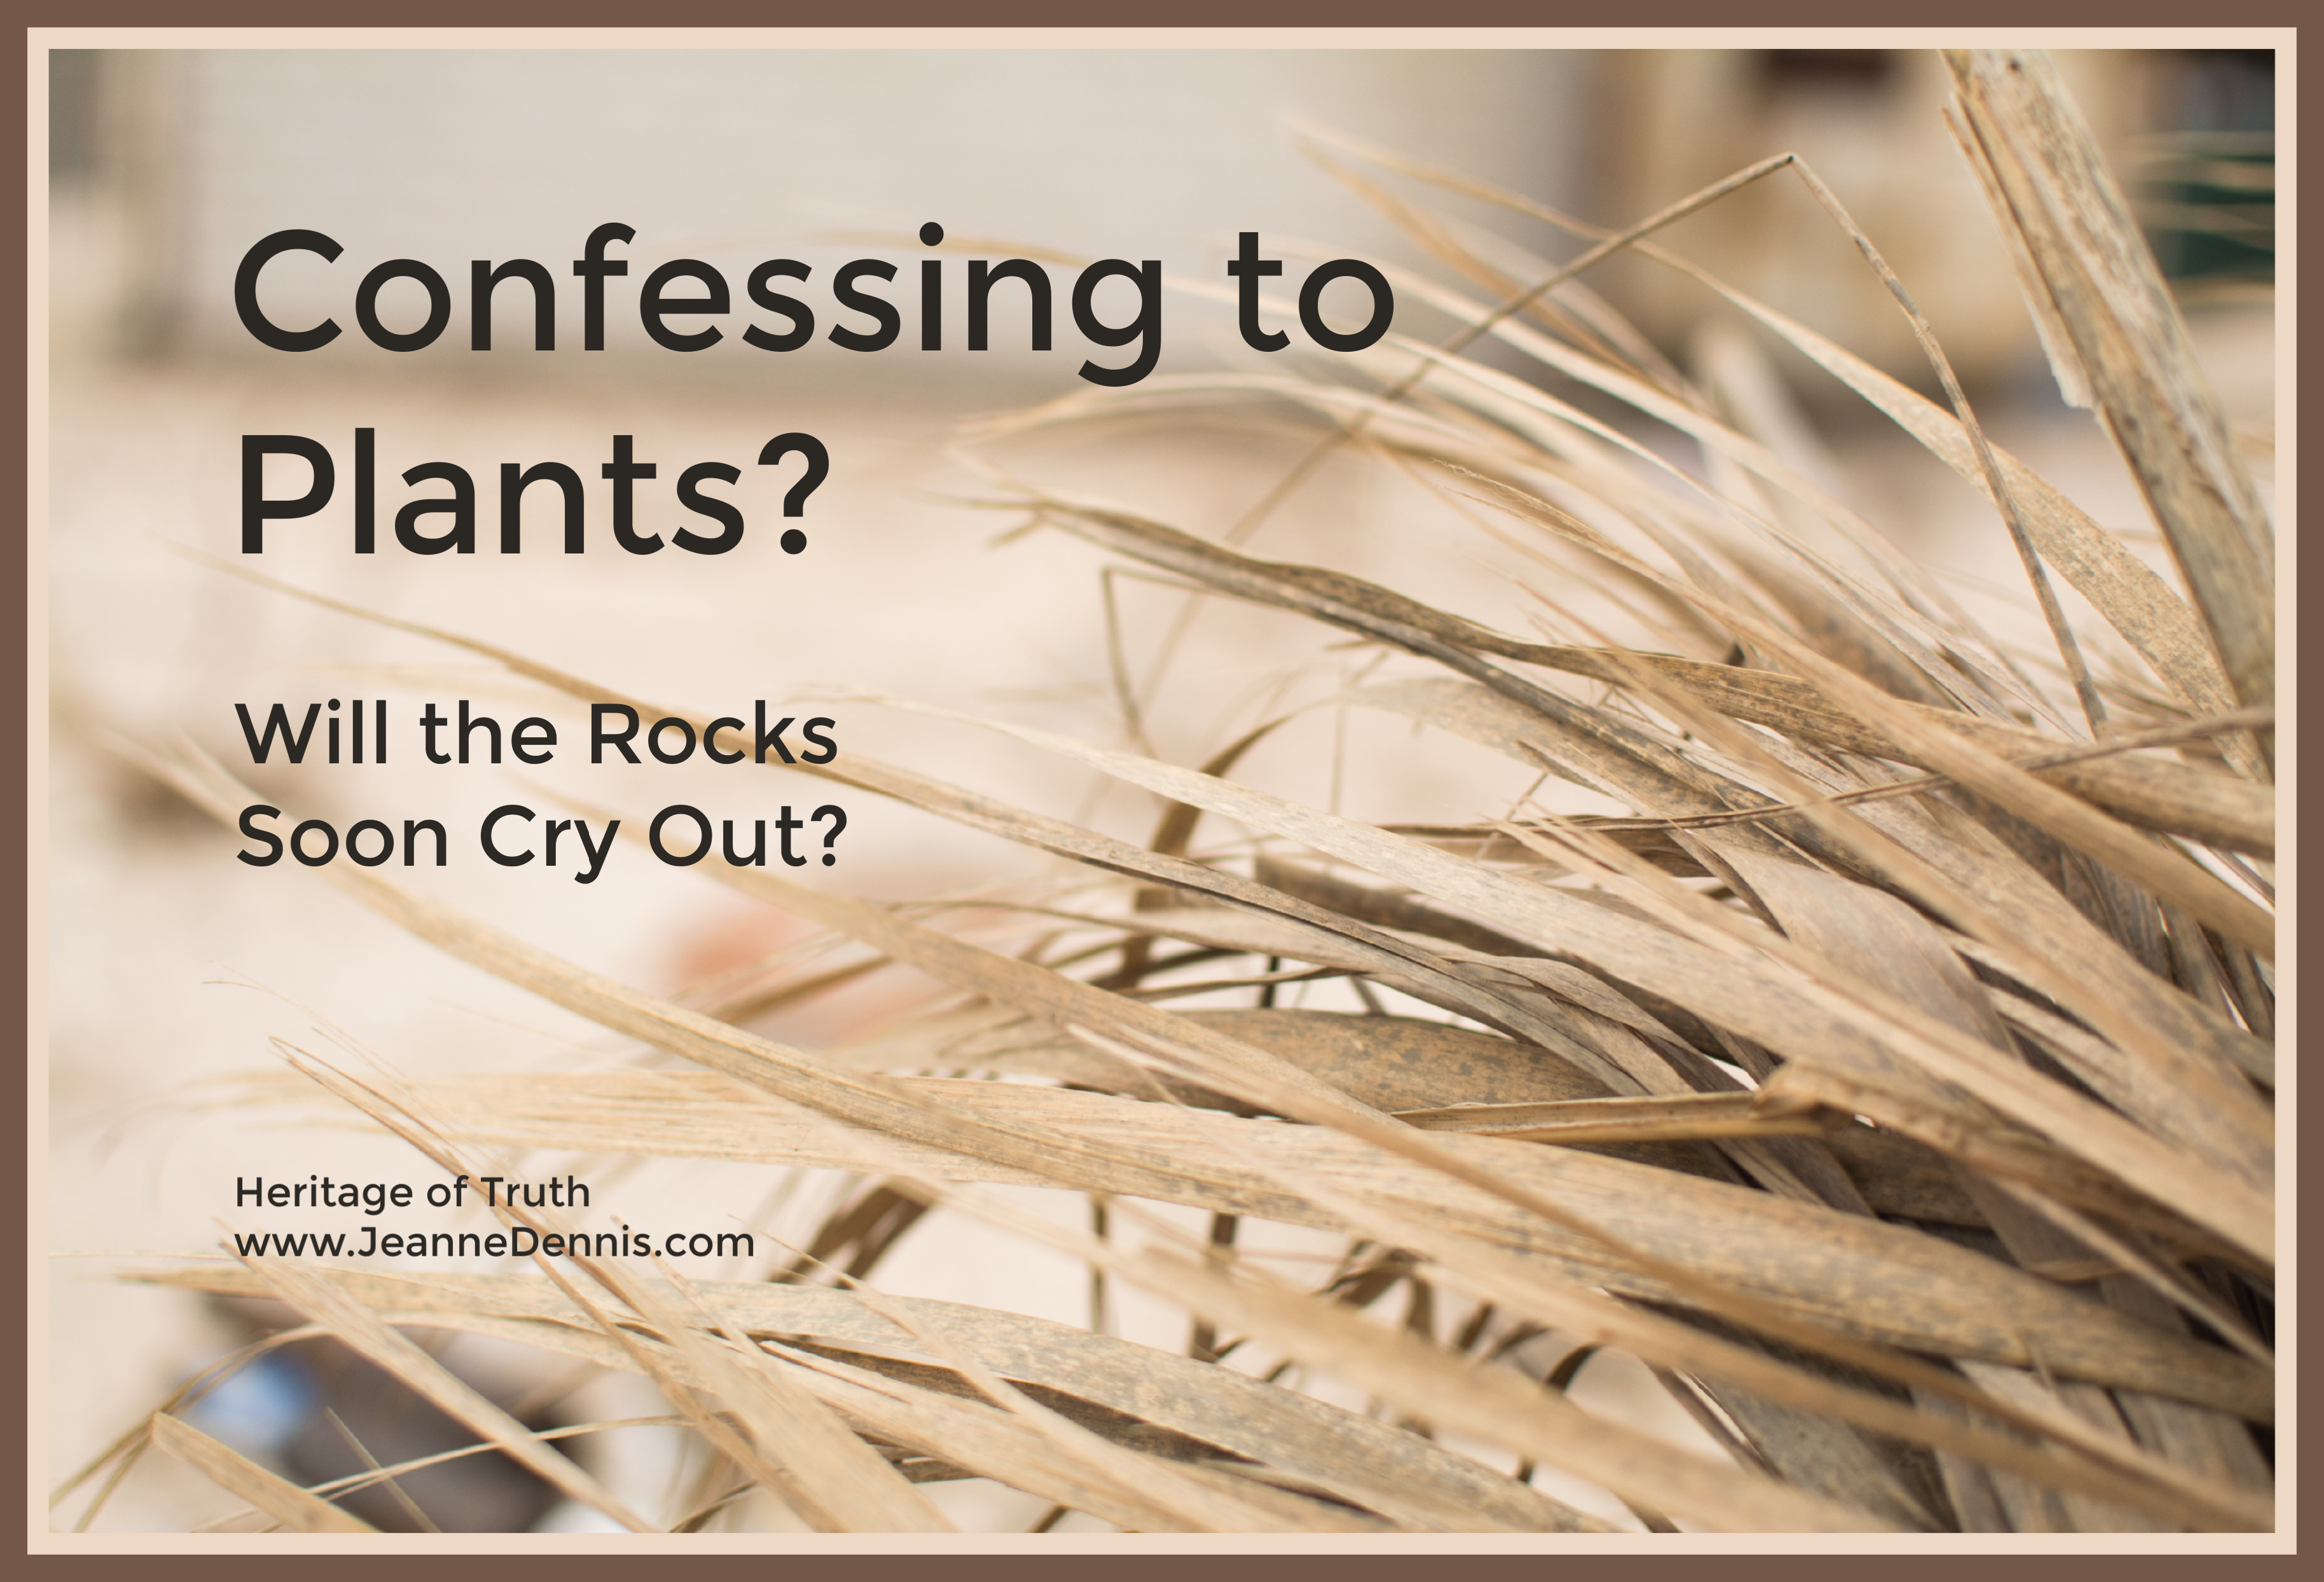 Confessing to Plants? Will the Rocks Soon Cry Out? Heritage of Truth, www.JeanneDennis.com